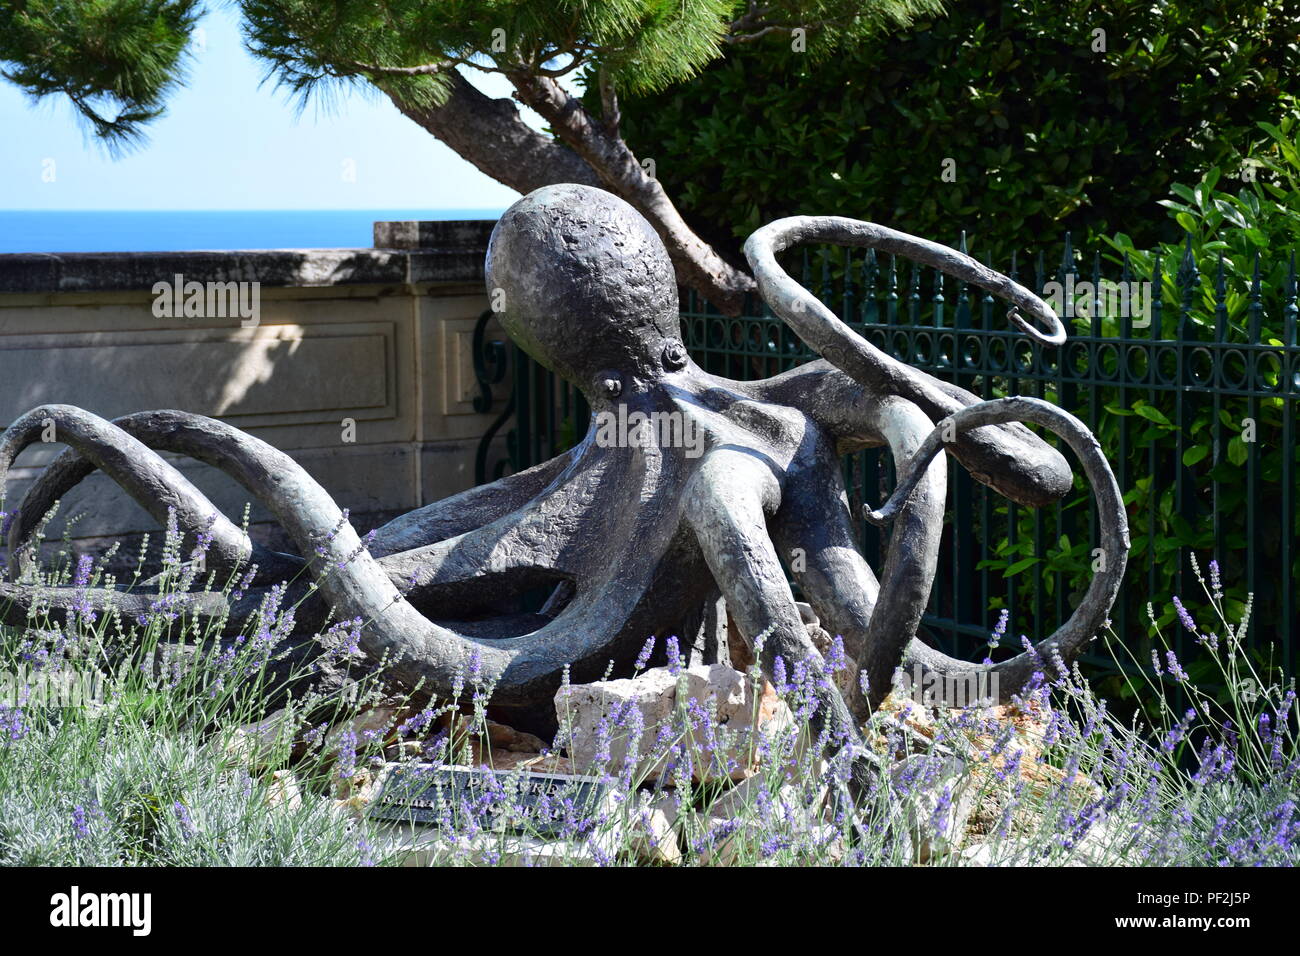 Octopus sculpture on the grounds of the Oceanographic Institute in Monaco Stock Photo